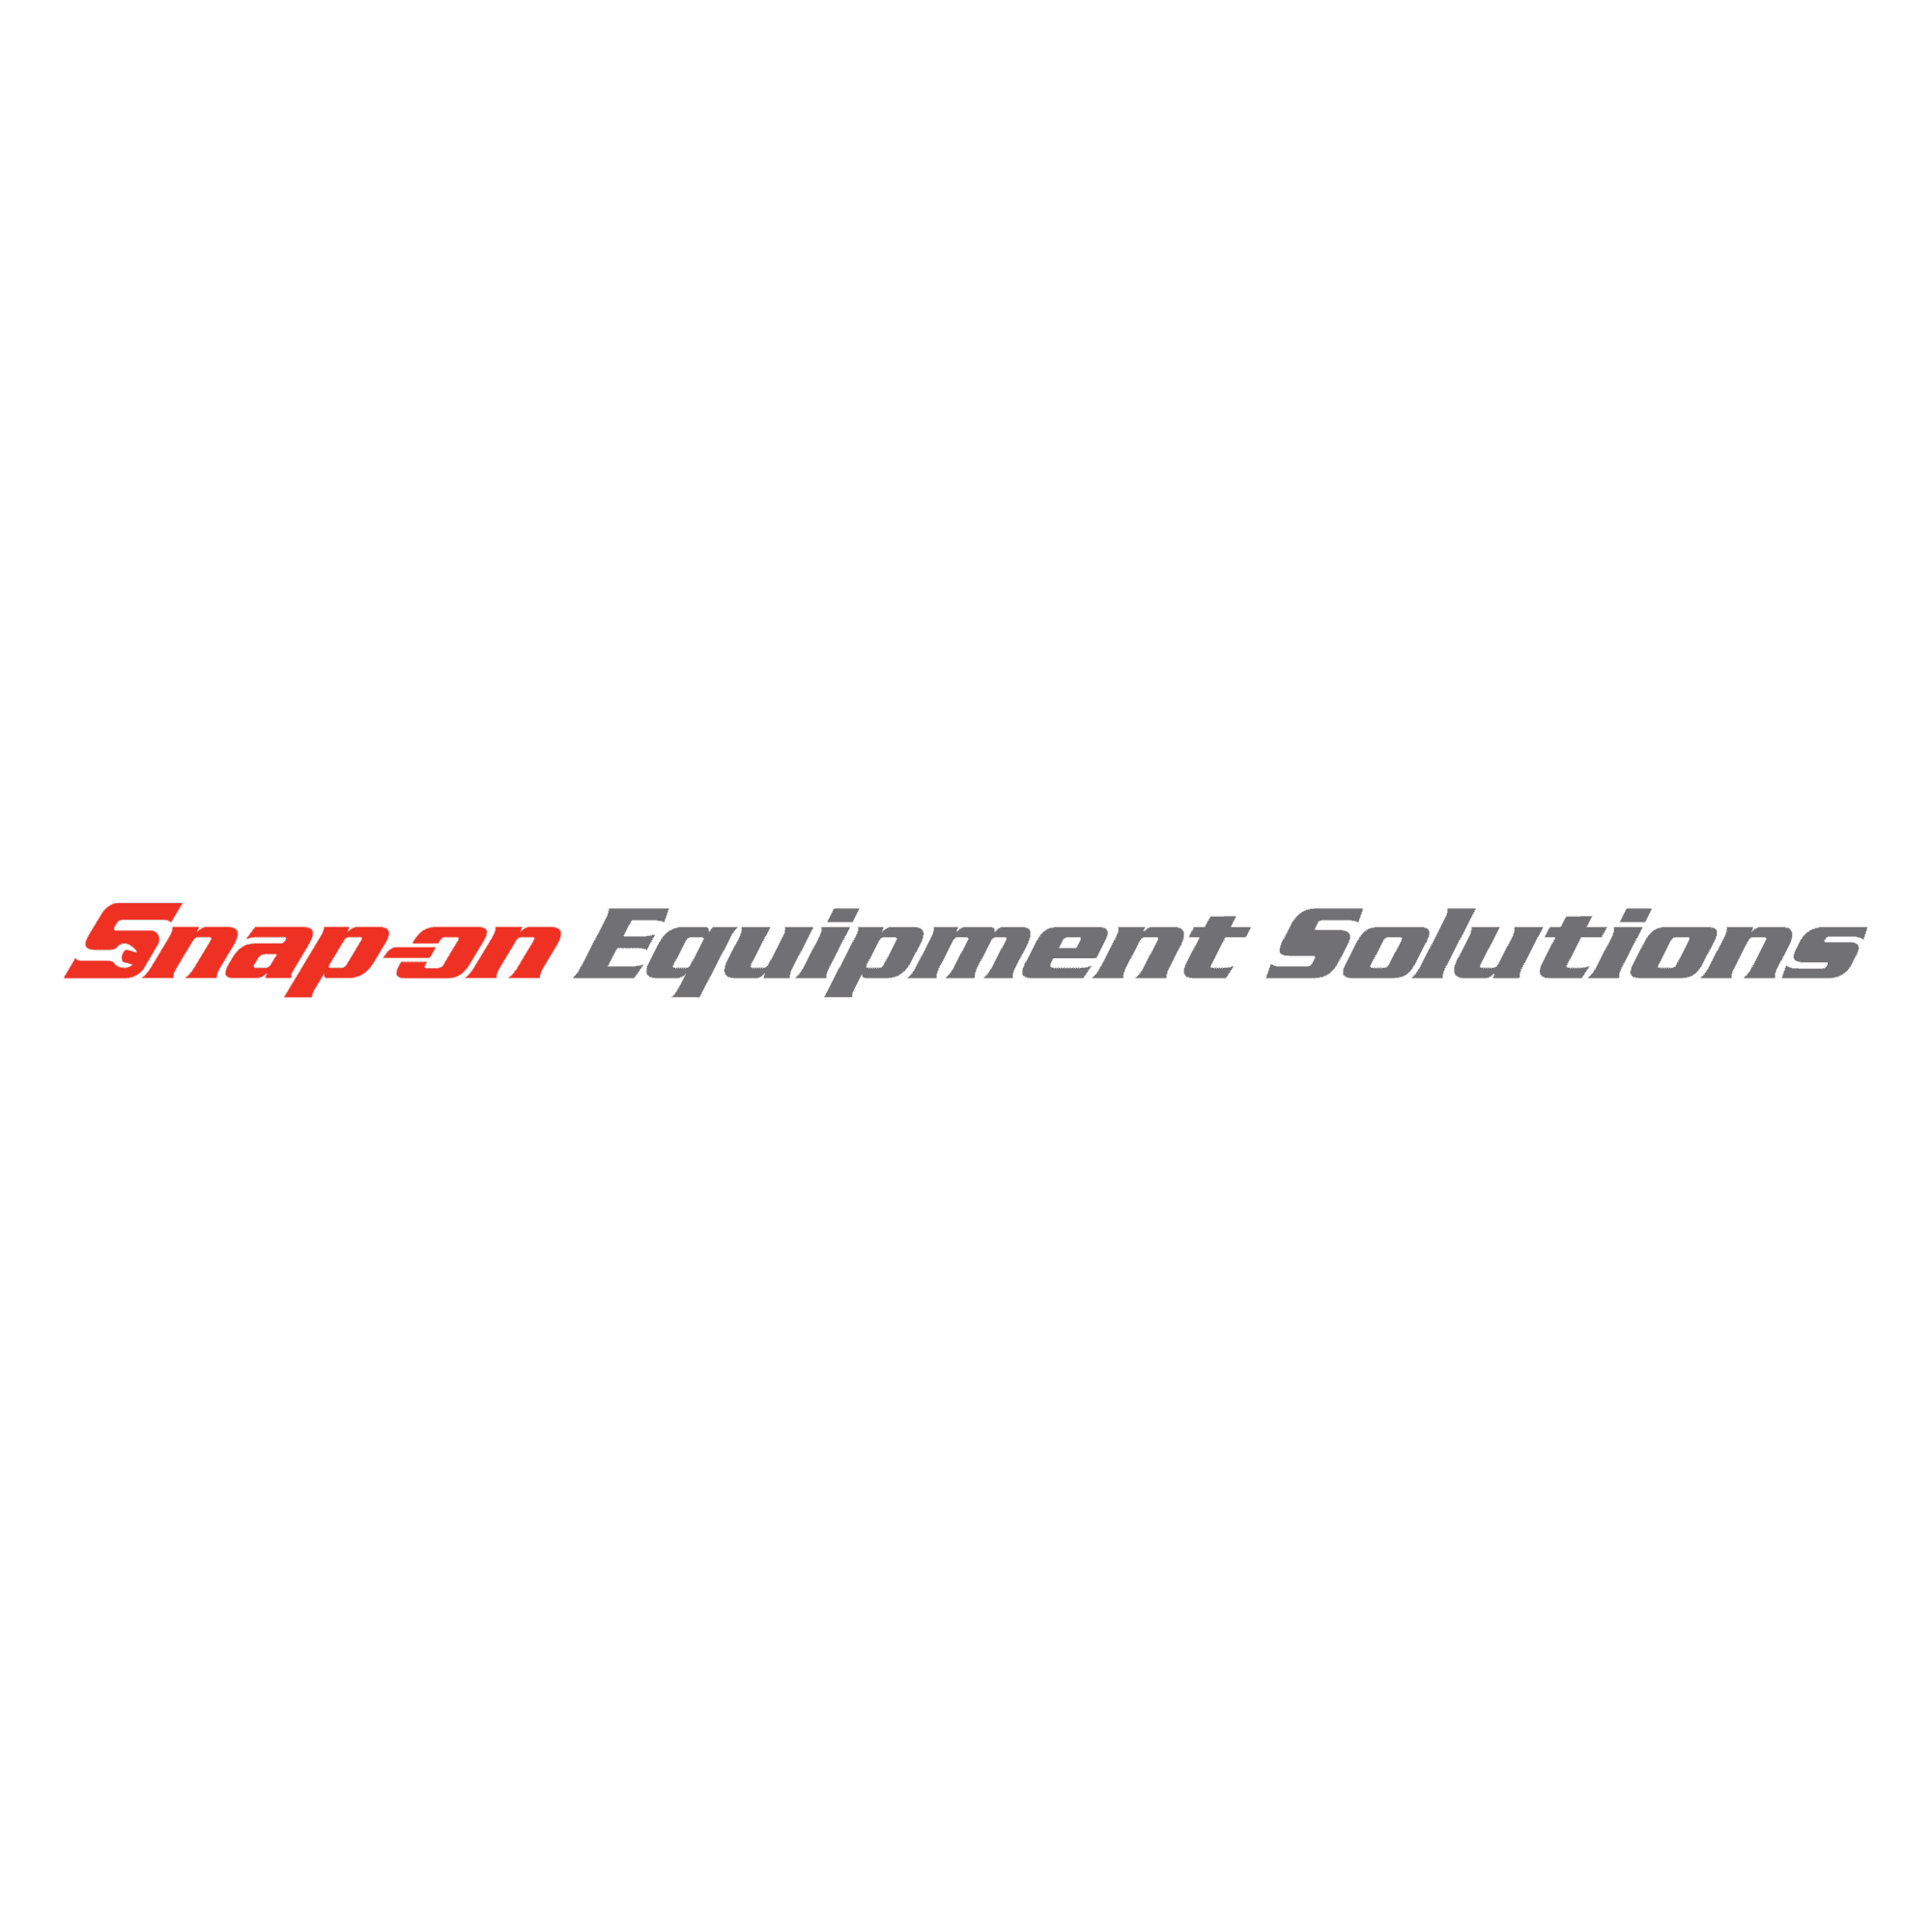 <p>Snap-on Equipment Solutions</p> logo